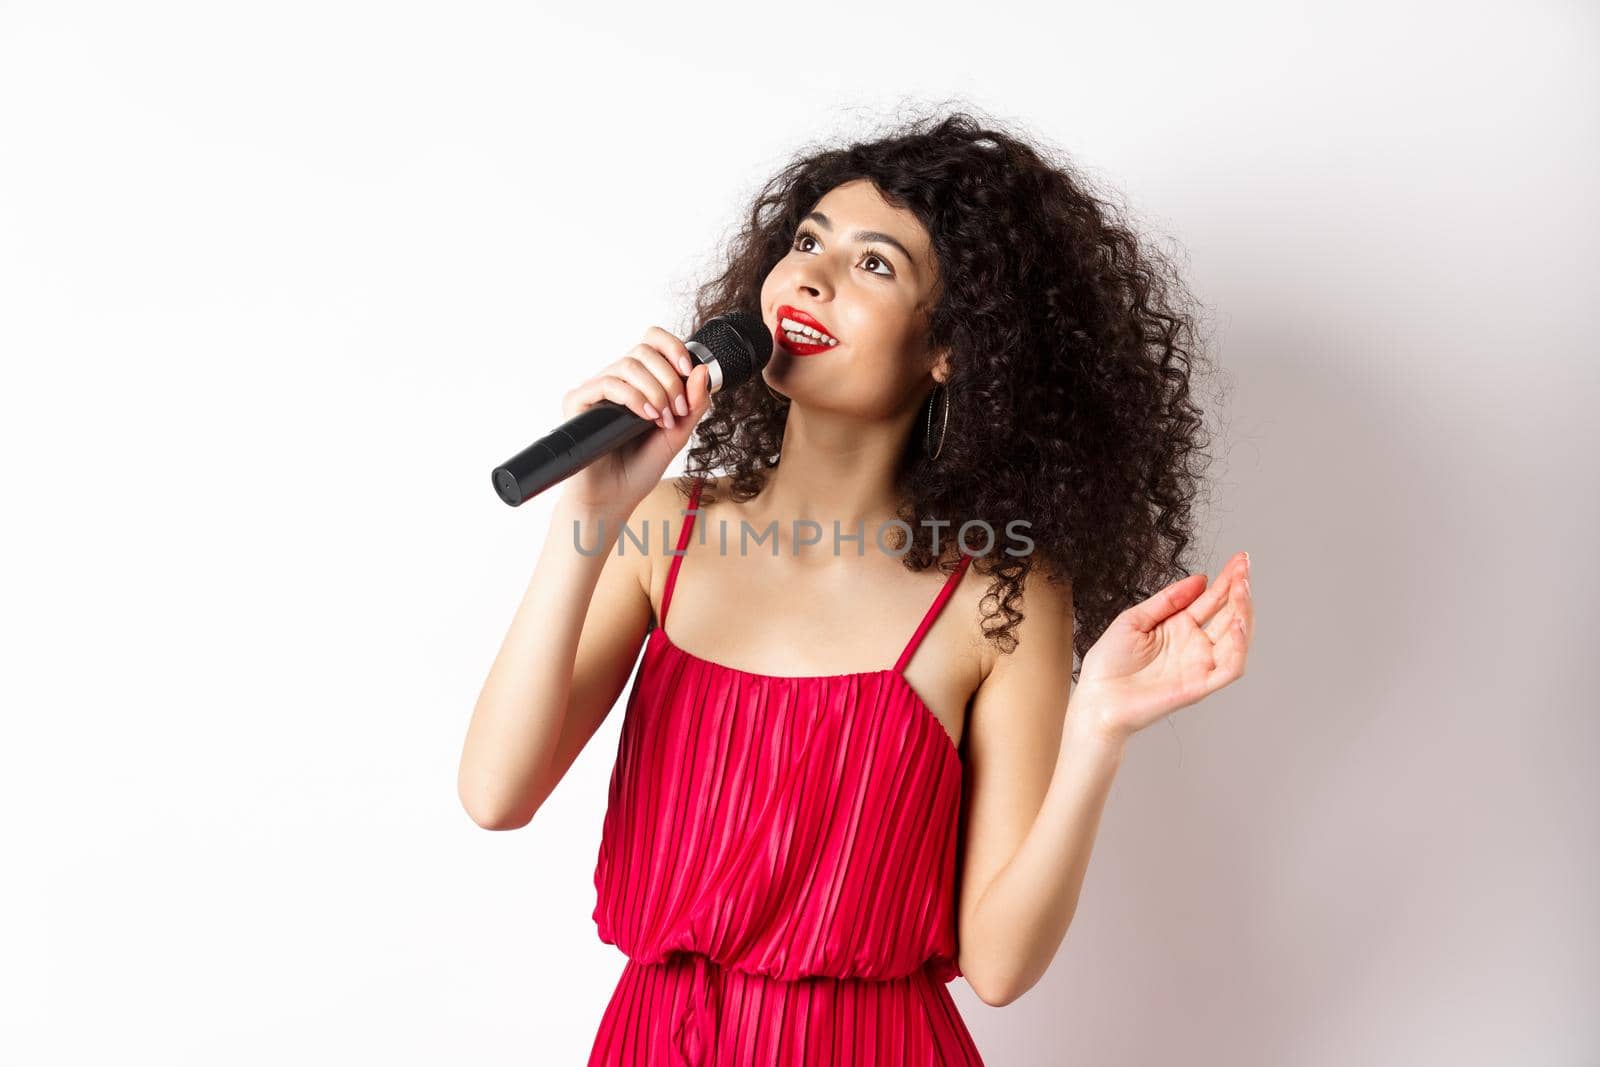 Beautiful lady in red dress singing songs in microphone, smiling and looking up, standing on white background.